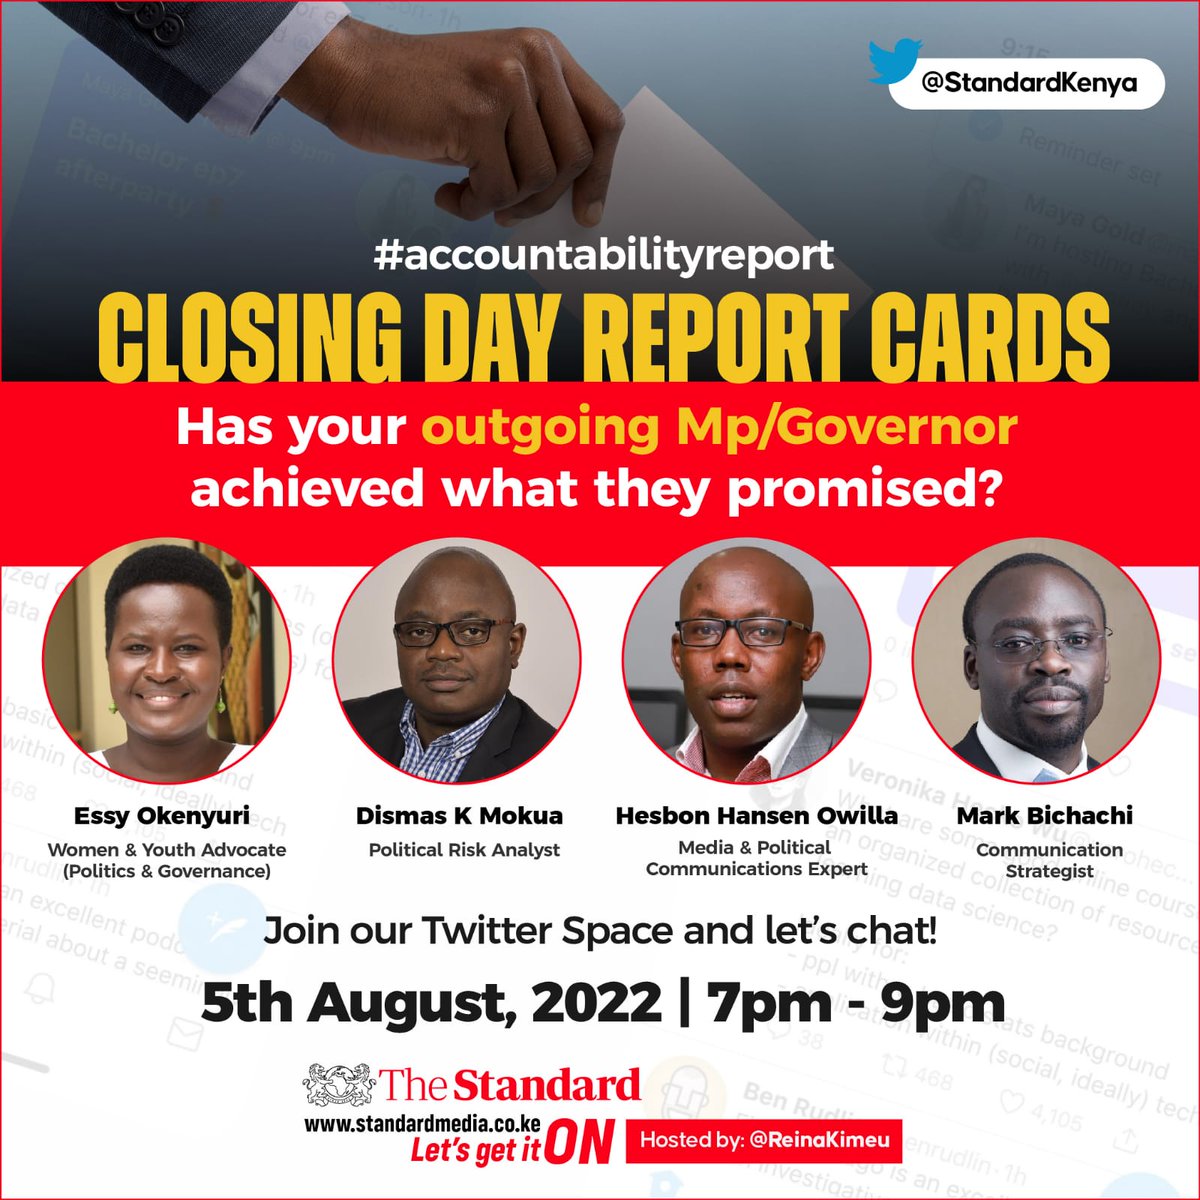 What is leadership accountability and why is it important? Has your outgoing MCA, MP or Governor accomplished what they promised? Share your opinion on our Twitter Space today at 2pm - 4pm. #accountabilityreport #inmyopinion 

Join us by clicking the link x.com/i/spaces/1zqkv…